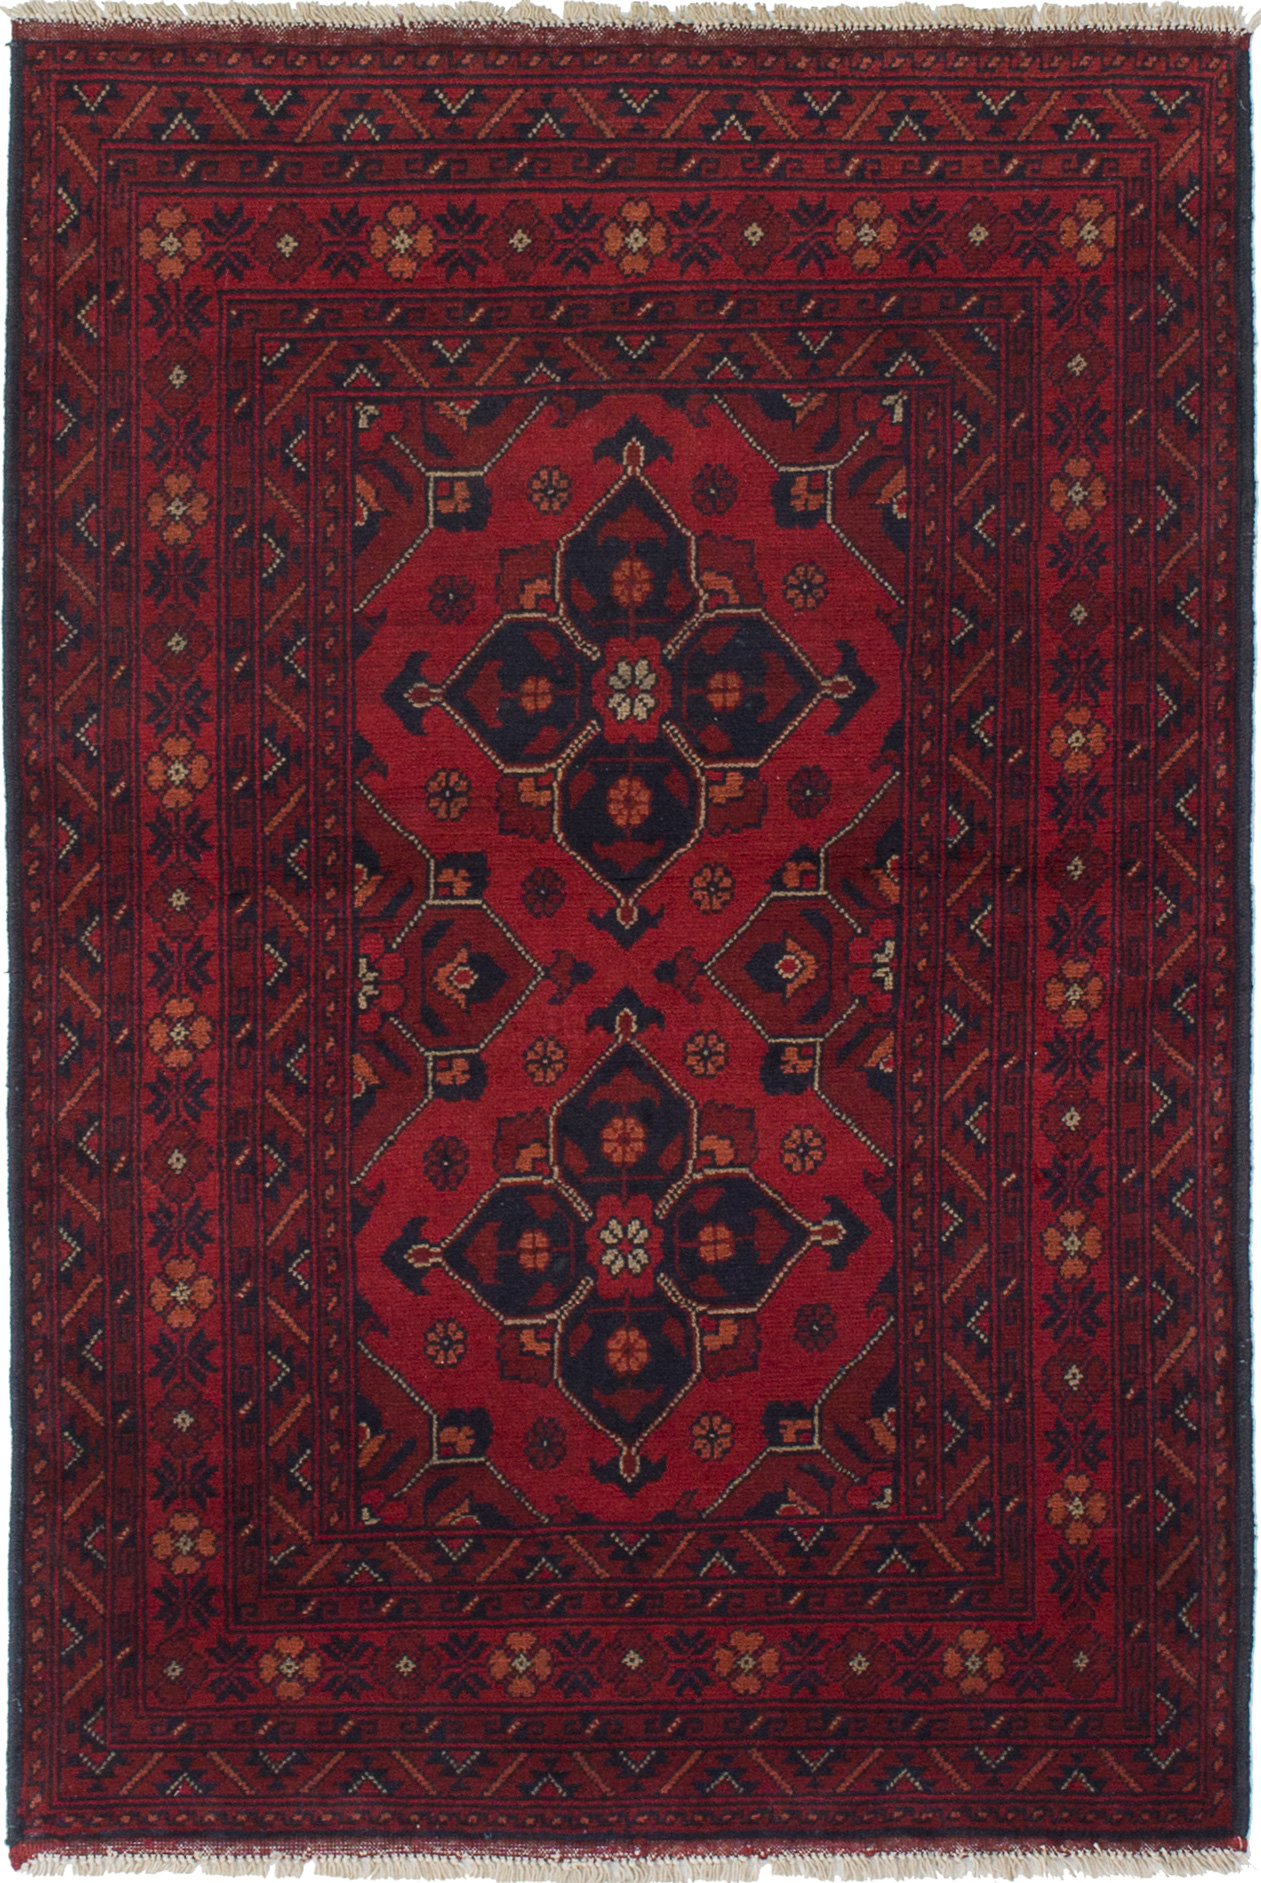 Hand-knotted Finest Khal Mohammadi Dark Red Wool Rug 3'3" x 4'11"  Size: 3'3" x 4'11"  